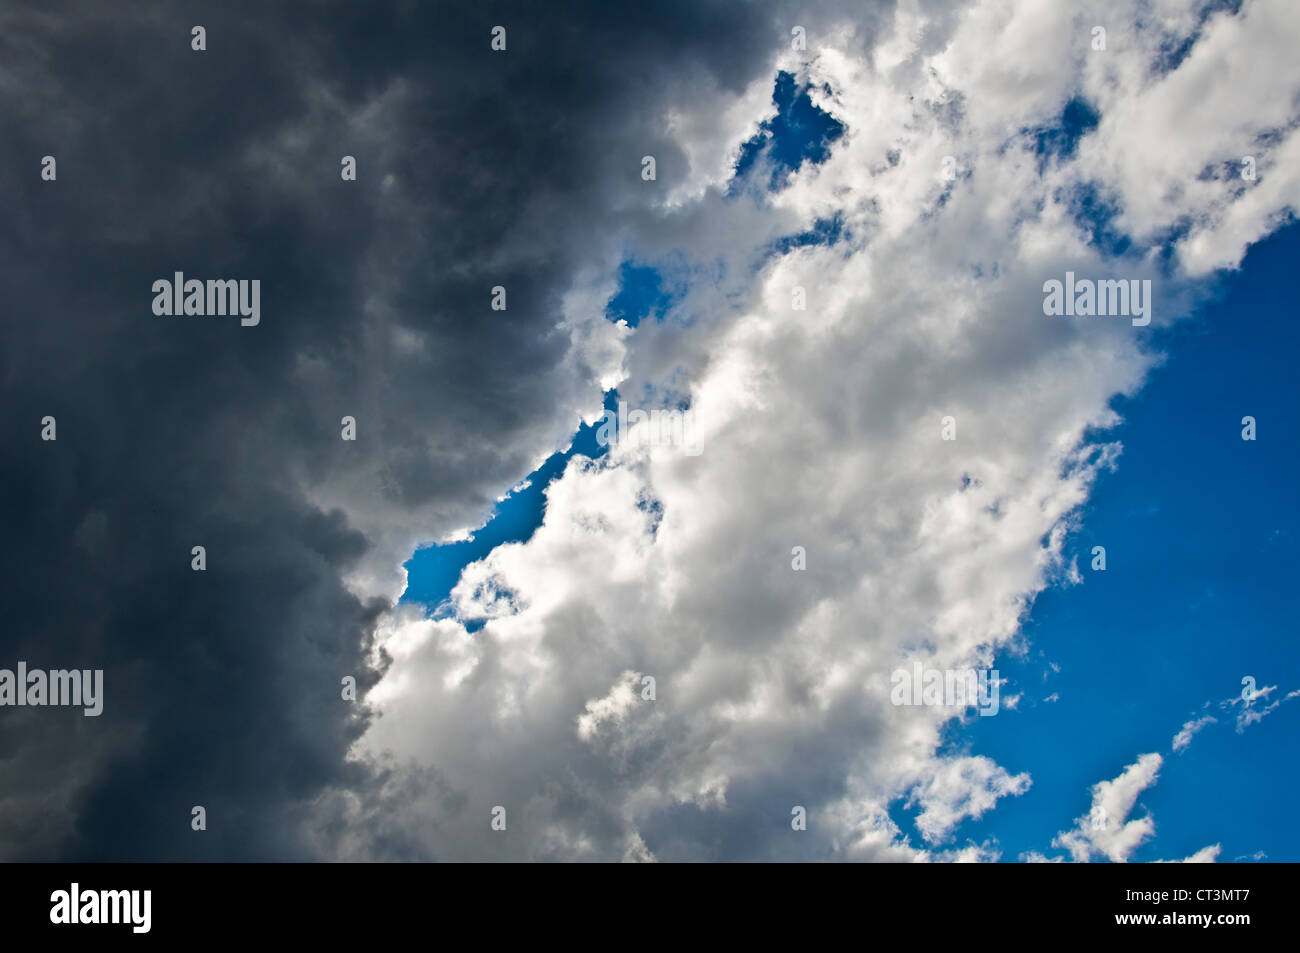 Black clouds and blue sky indicating that a storm is coming Stock Photo